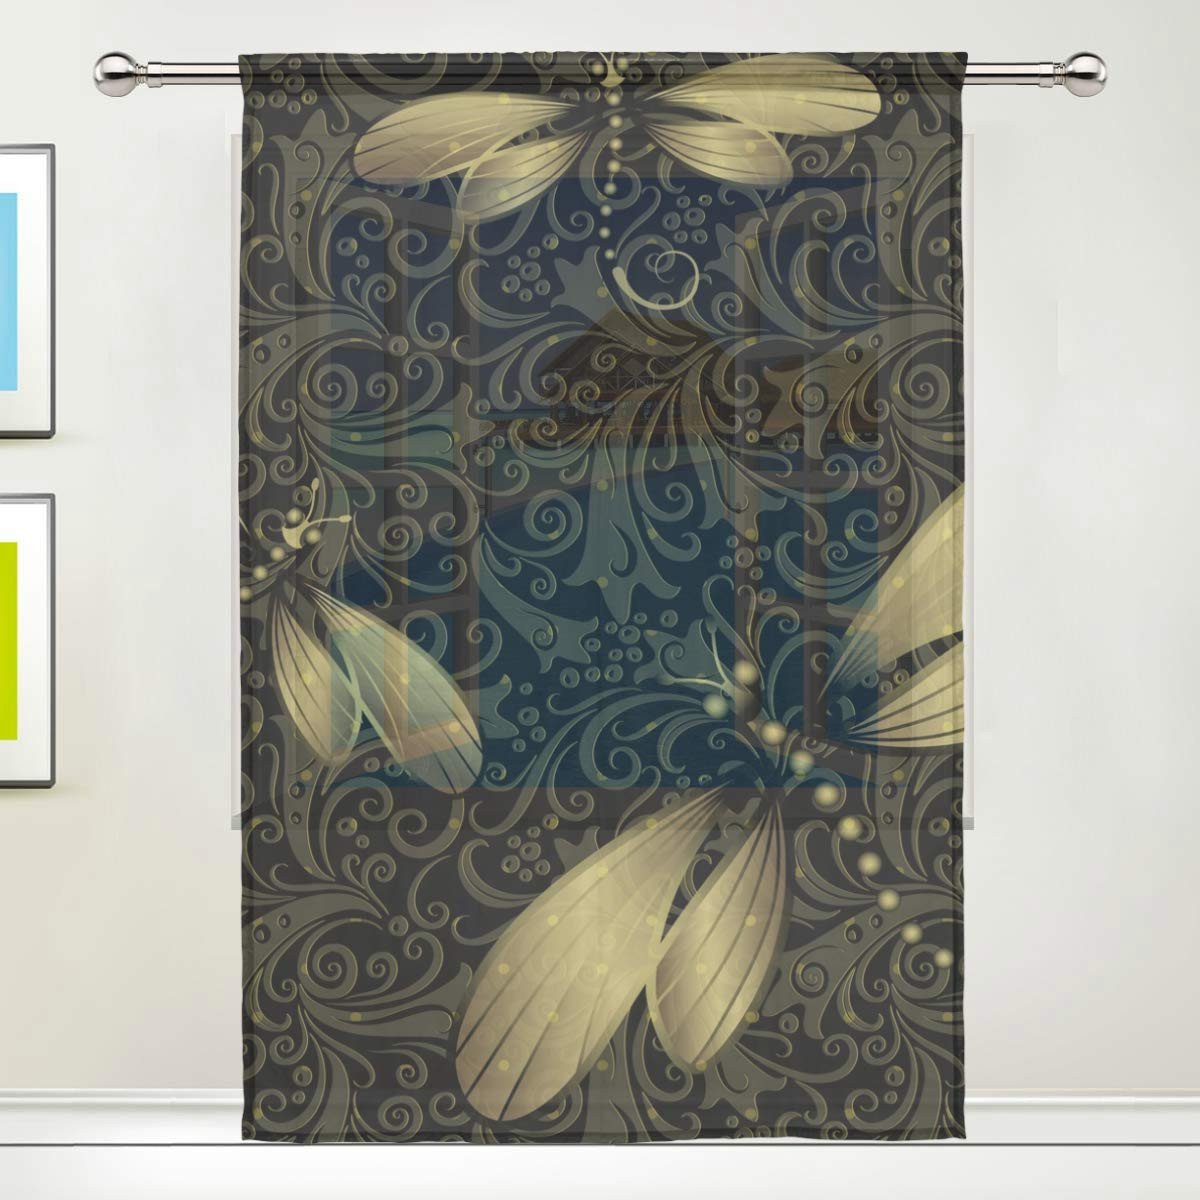 Teal and Gray Bedroom Luxury Dragon Sword Black Golden Vintage Dragonfly Sheer Window Curtain Voile Drape for Kitchen Living Room or Kids Bedroom 55&quot; W X 84&quot; L 1 Panel